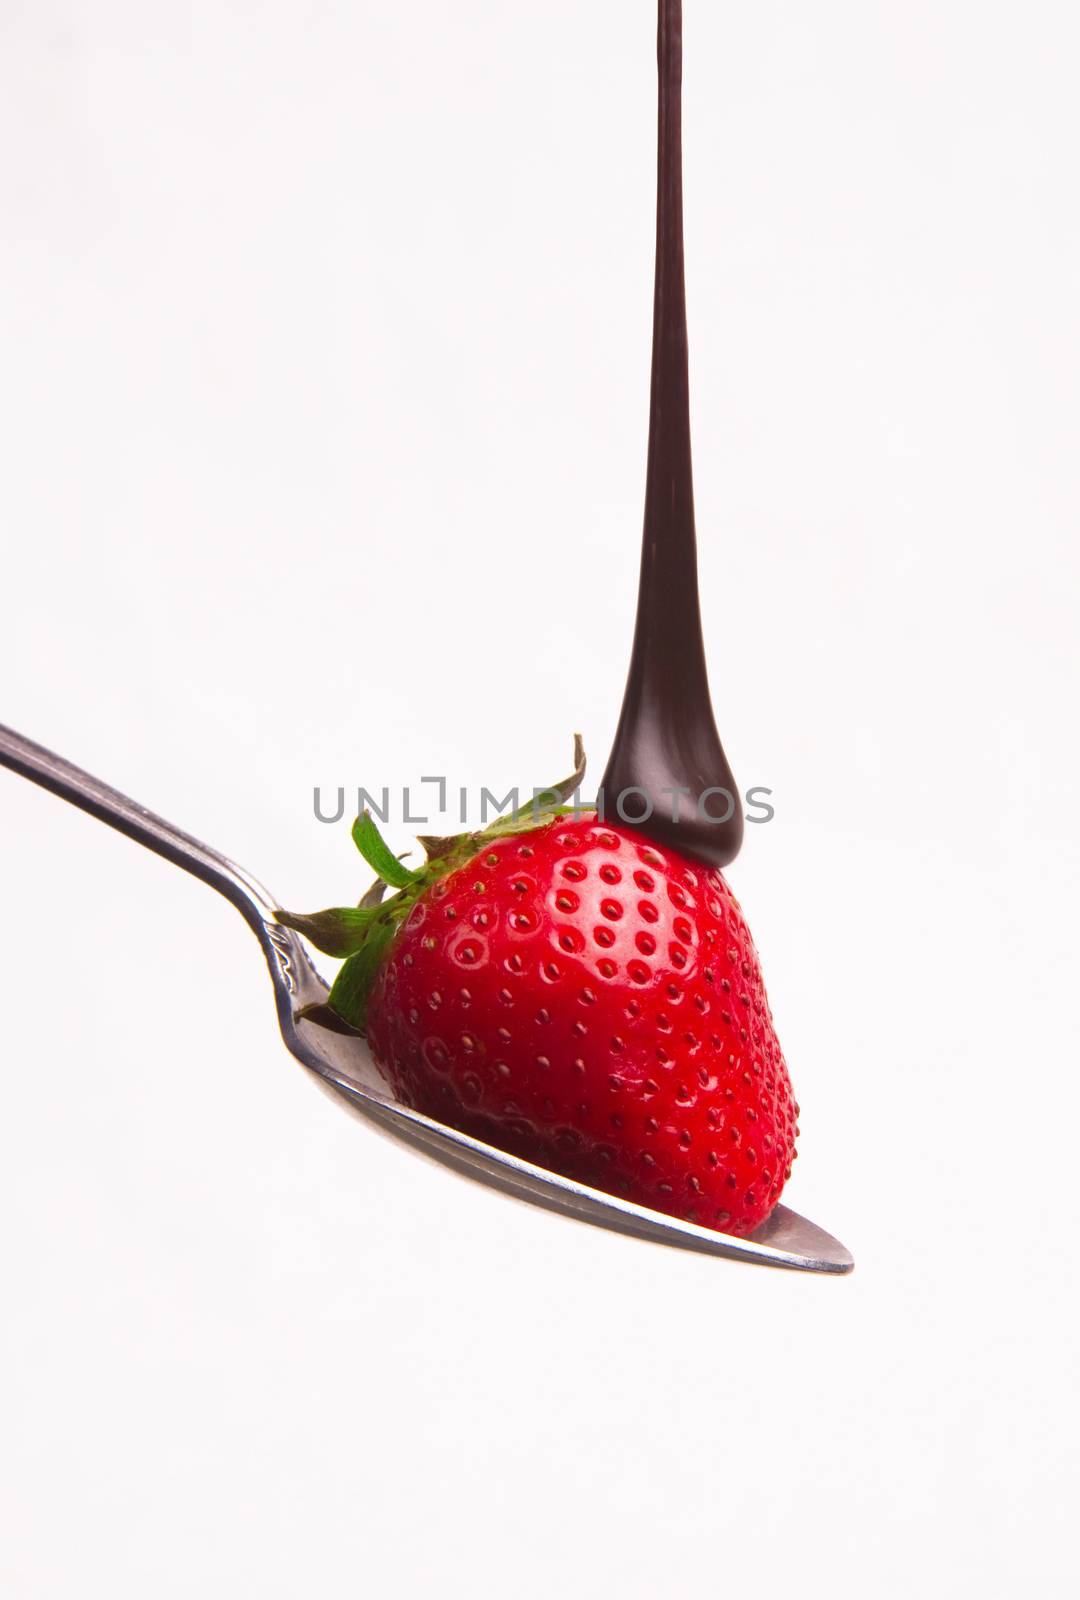 sweet fruit strawberry in chocolate syrup on silver spoon by ChrisBoswell